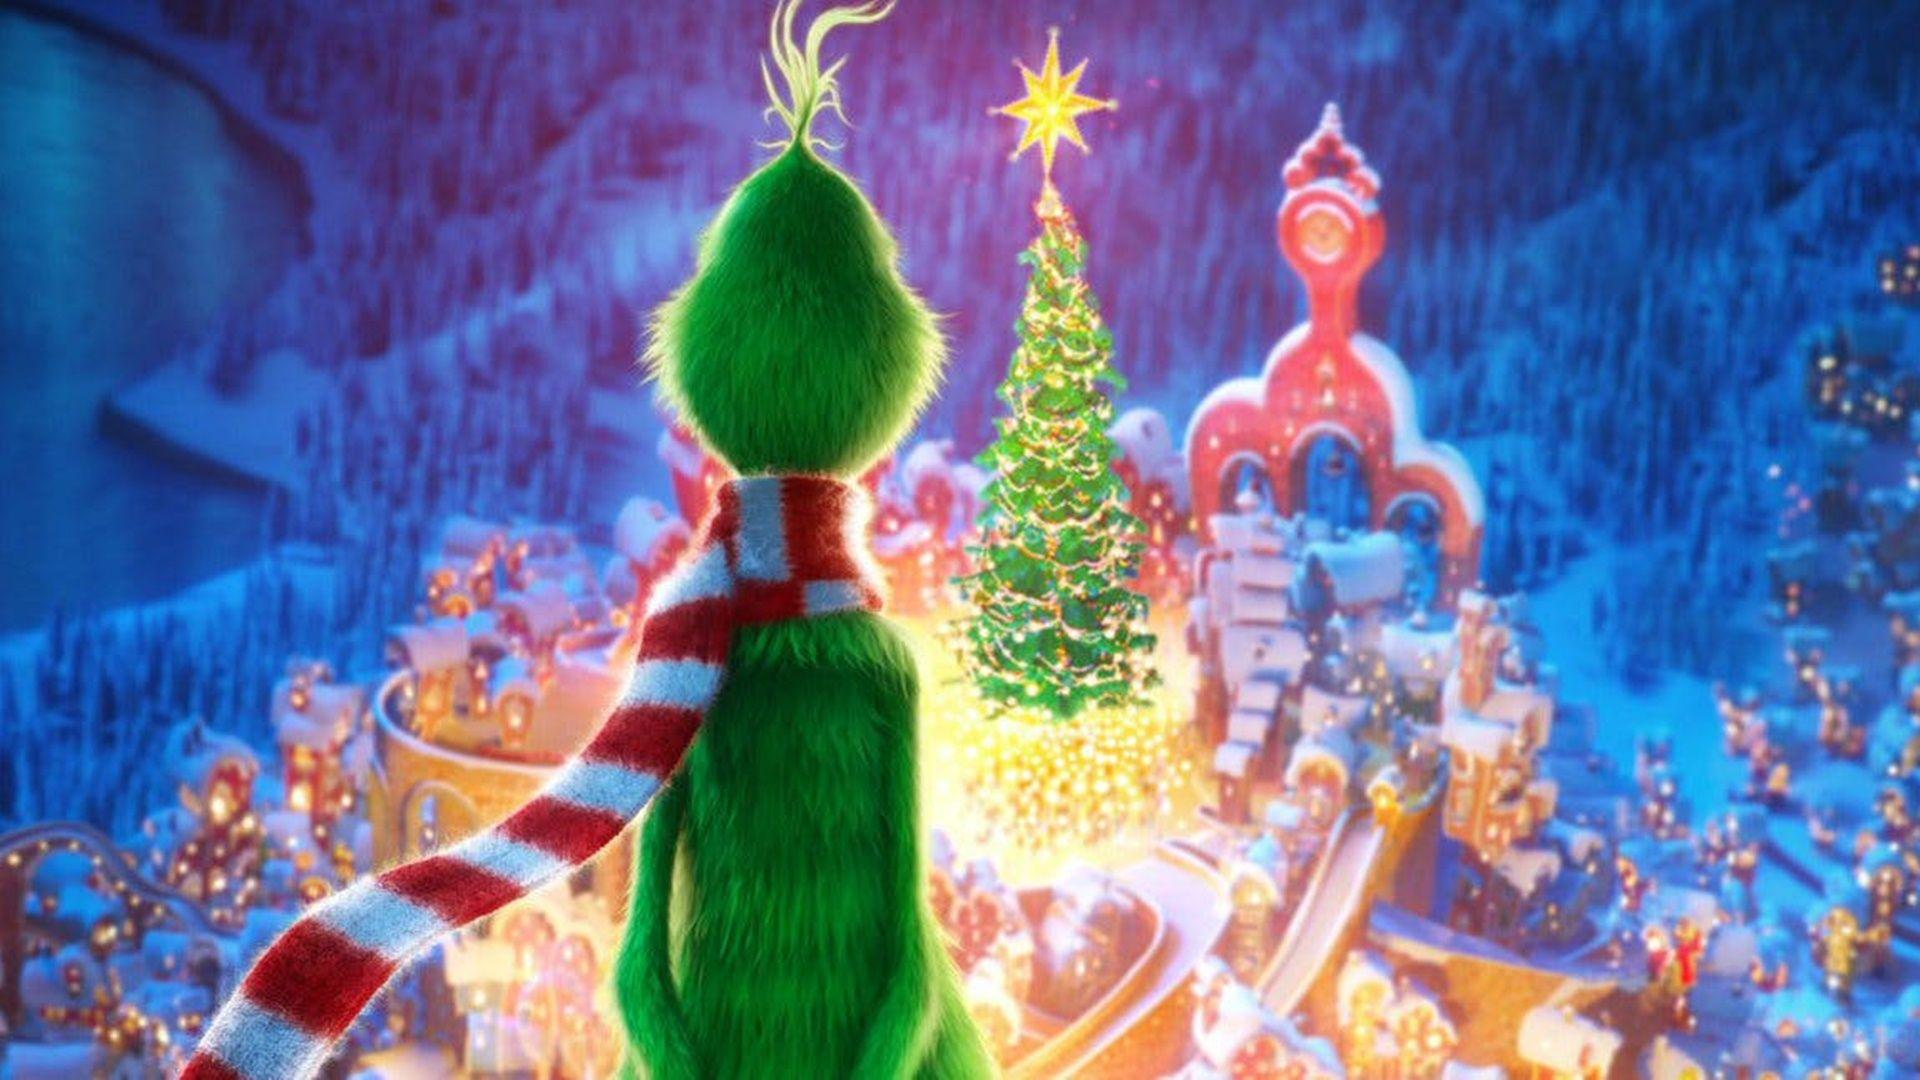 The Grinch Wallpaper HD Background, Image, Pics, Photo Free